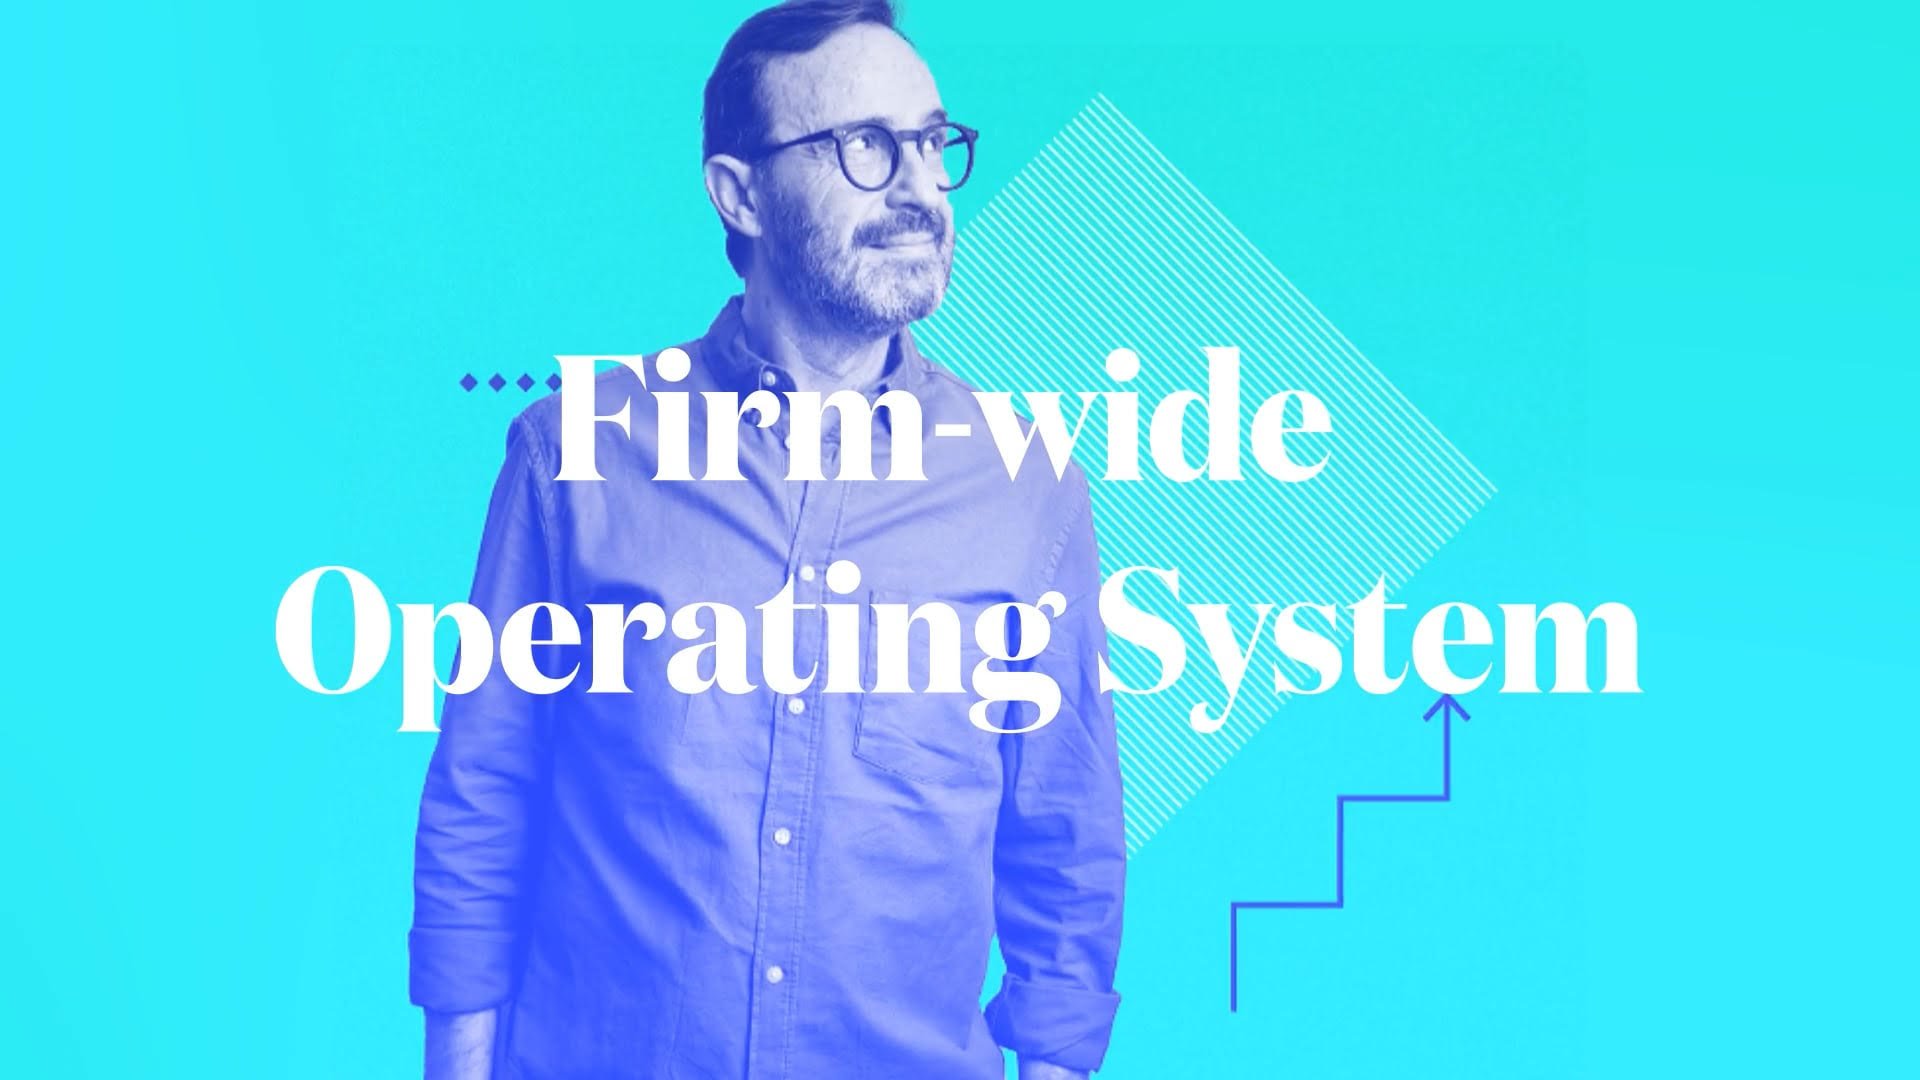 Moving From Practice Management to Firm Wide Operating System